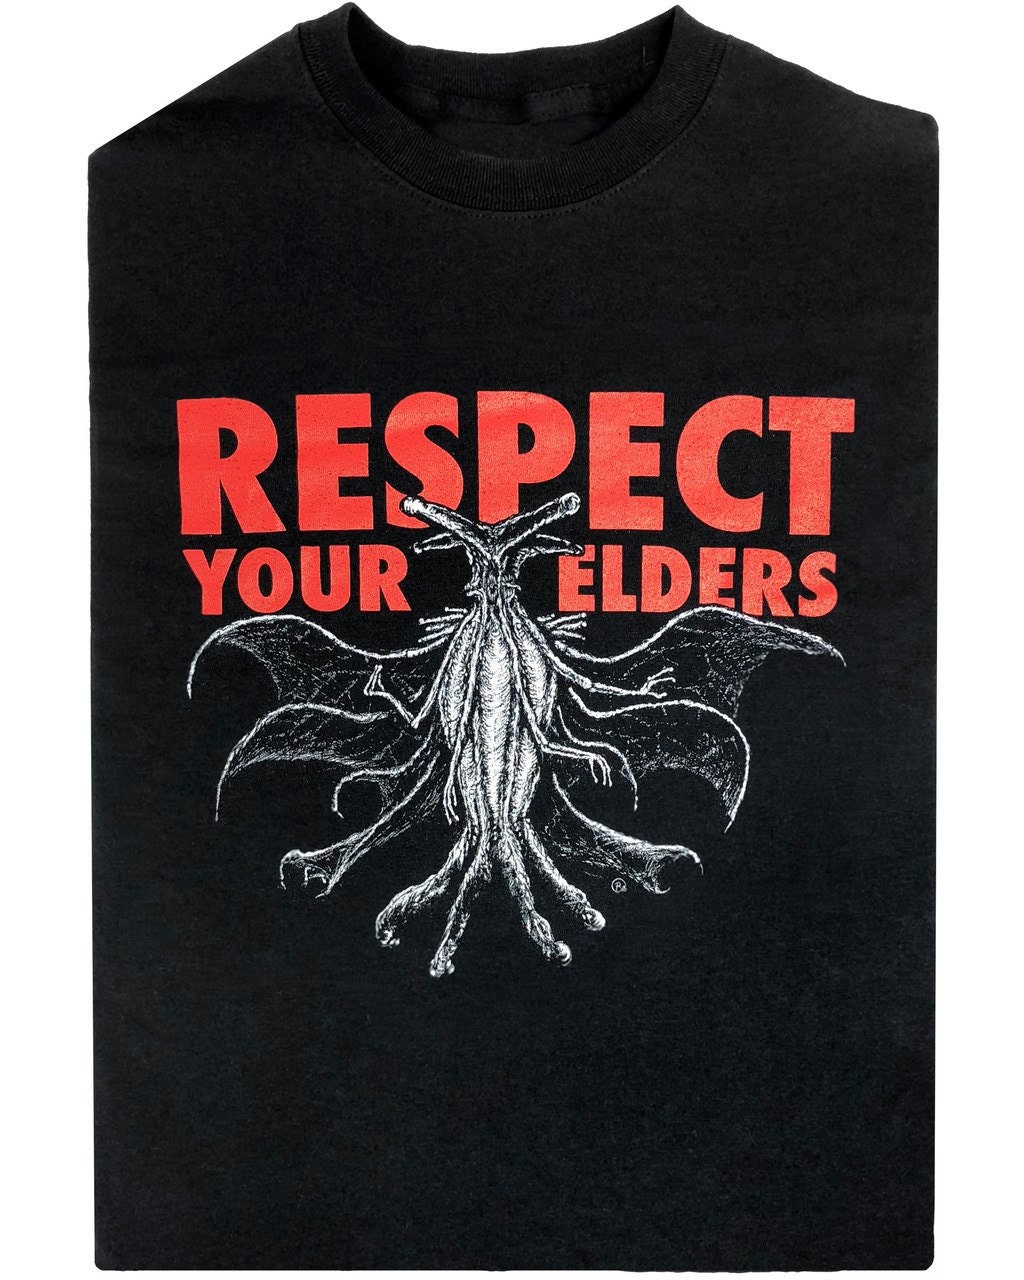 Discover Respect Your Elders Lovecraft Cthulhu Mountains of Madness unisex t-shirt, sizes S-4XL